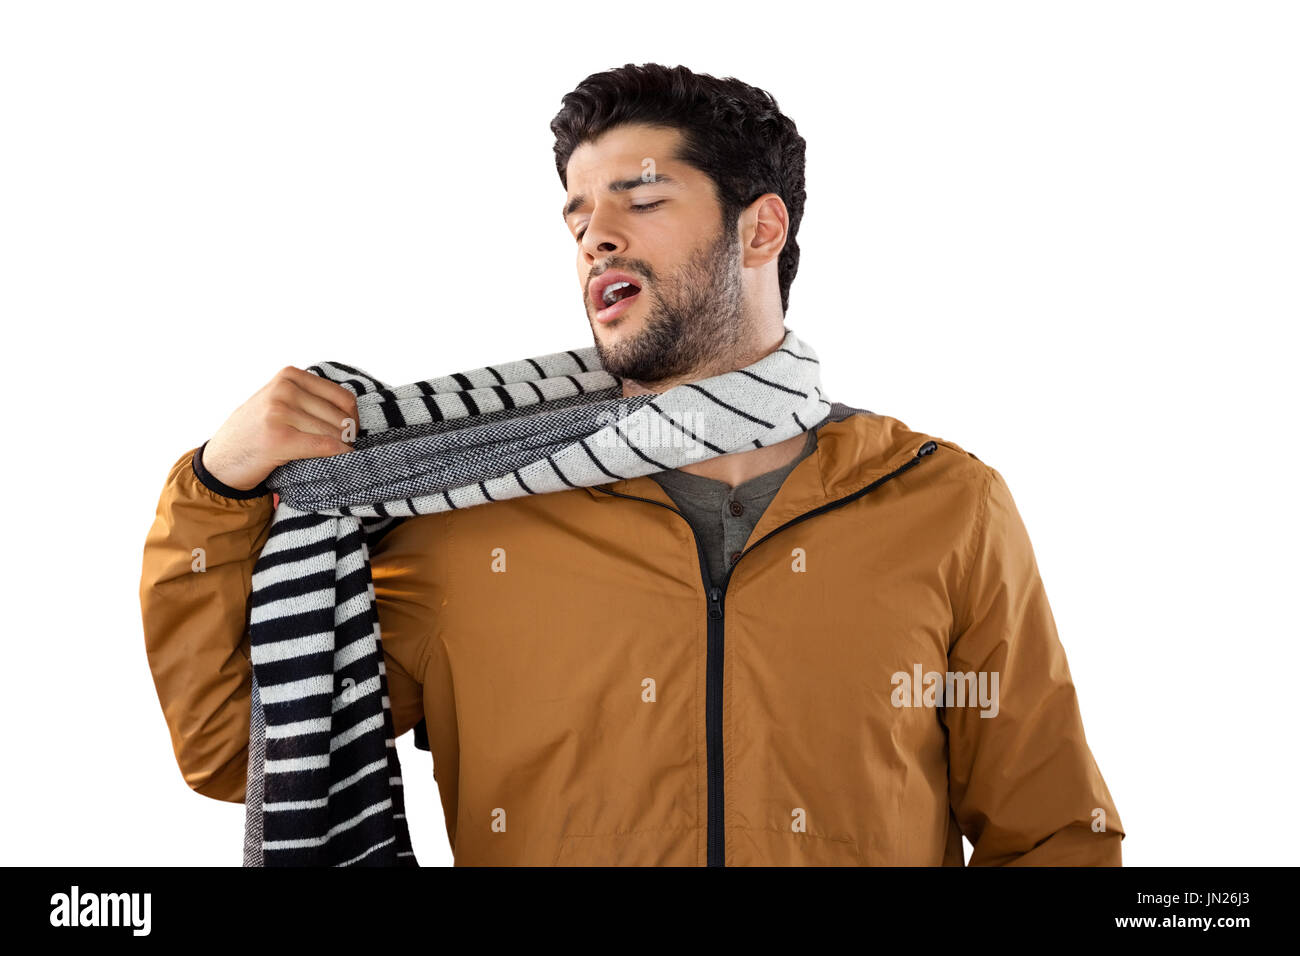 Man looking at his scarf against white background Stock Photo